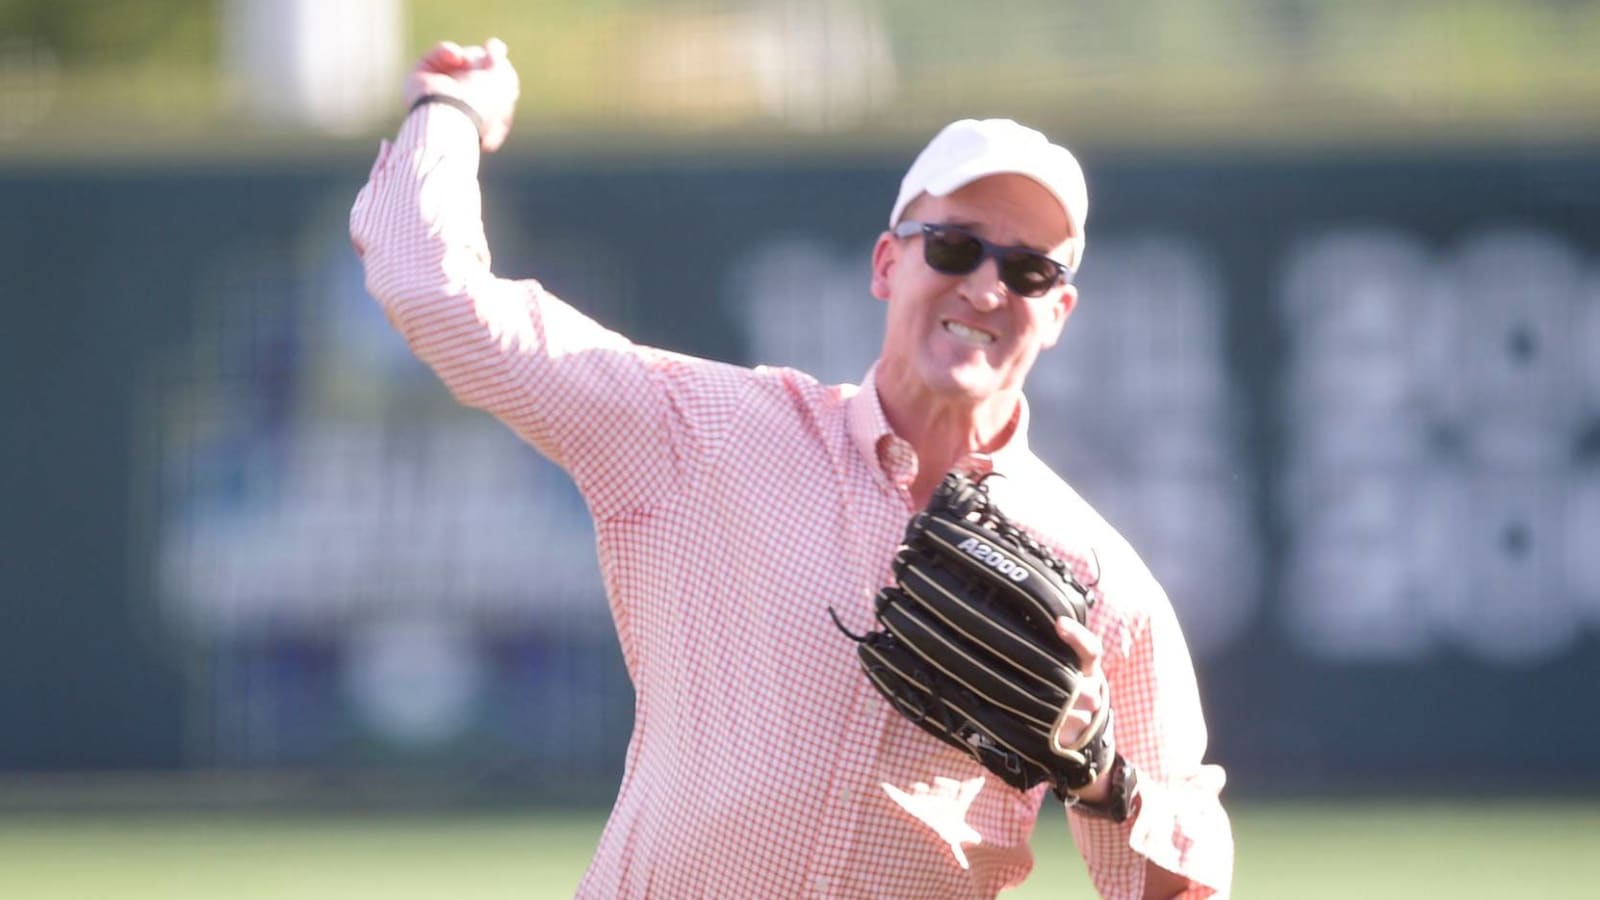 Peyton Manning teams with Tennessee baseball for ‘Omaha’ video